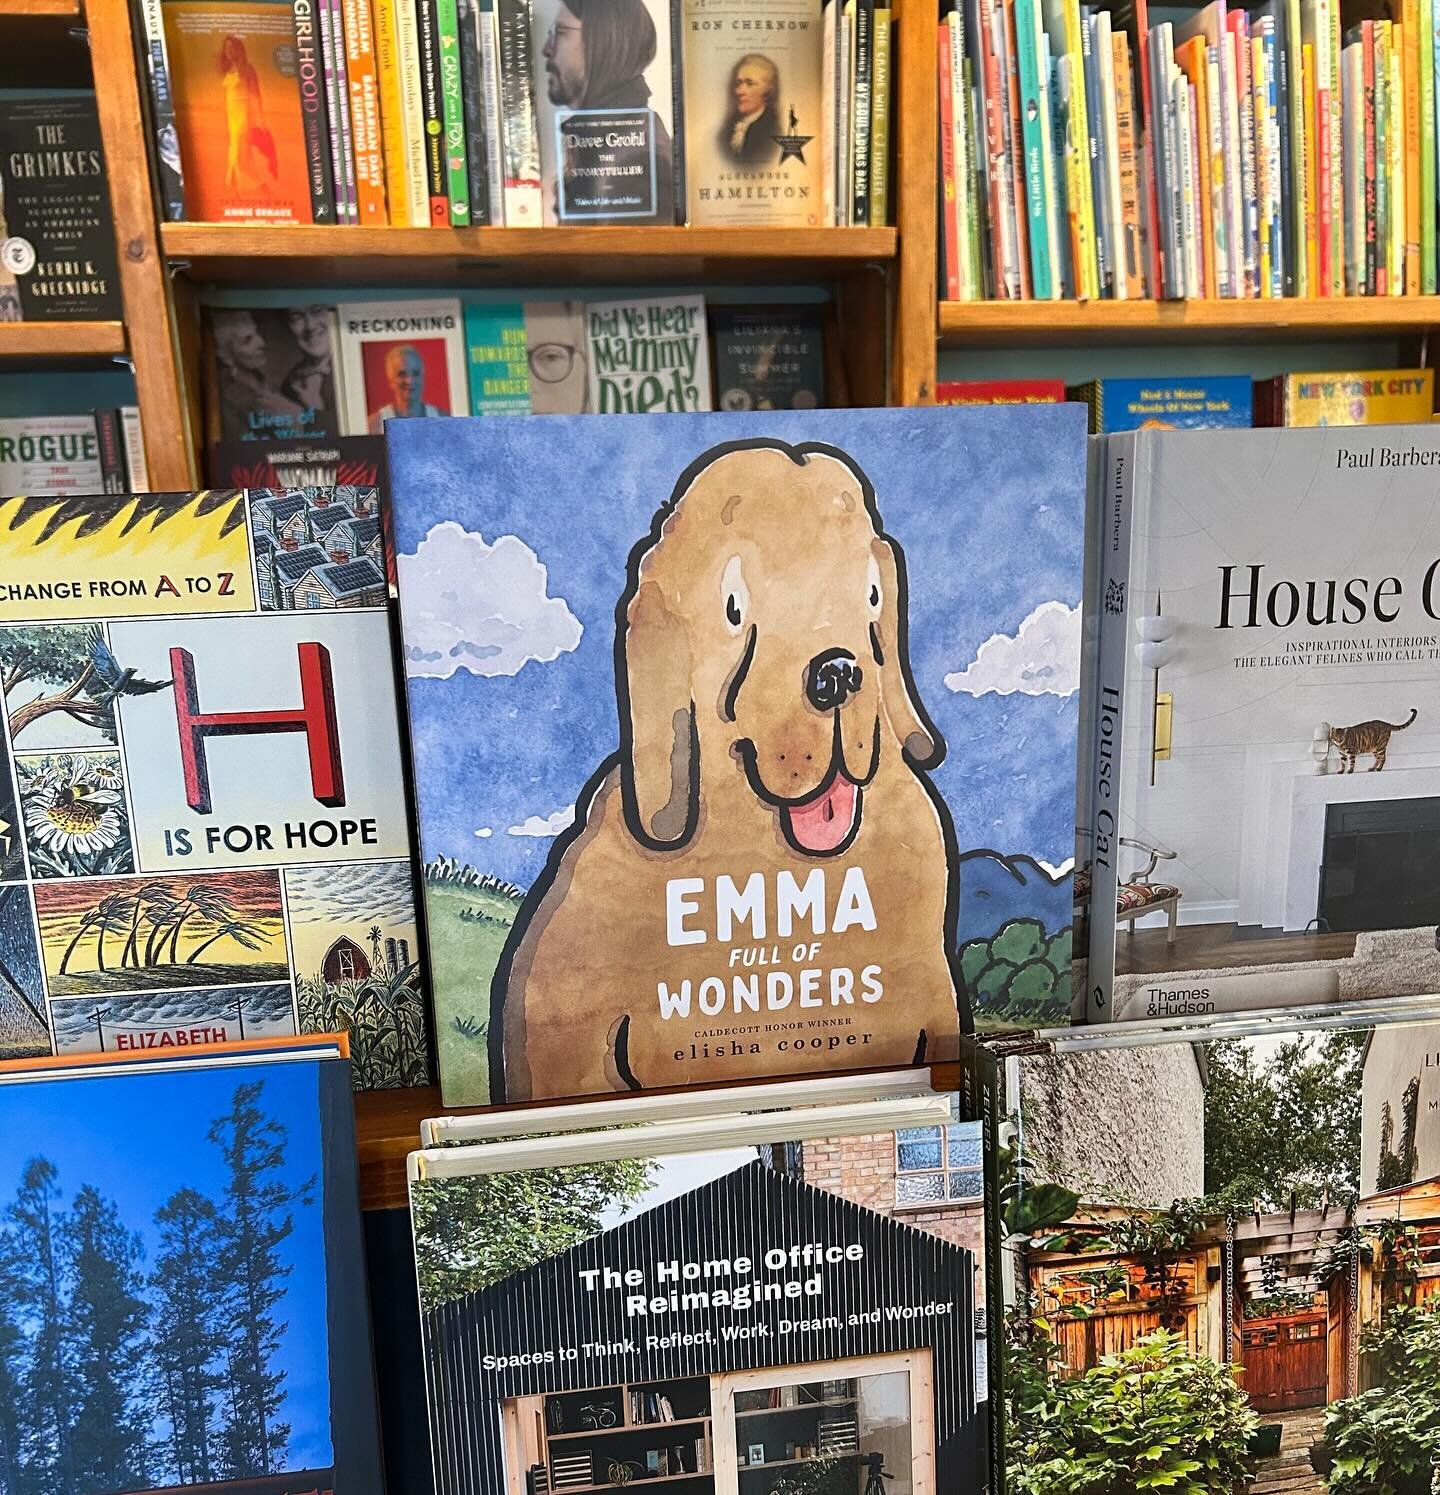 &ldquo;Emma&rdquo; is out! Today is the pub date, and a good day to say THANK YOU. Because a book takes a lot of people. A lot of work. Editing, designing, production, marketing. So here&rsquo;s to Roaring Brook and Macmillan, to Emilia, Kelsey, Kati